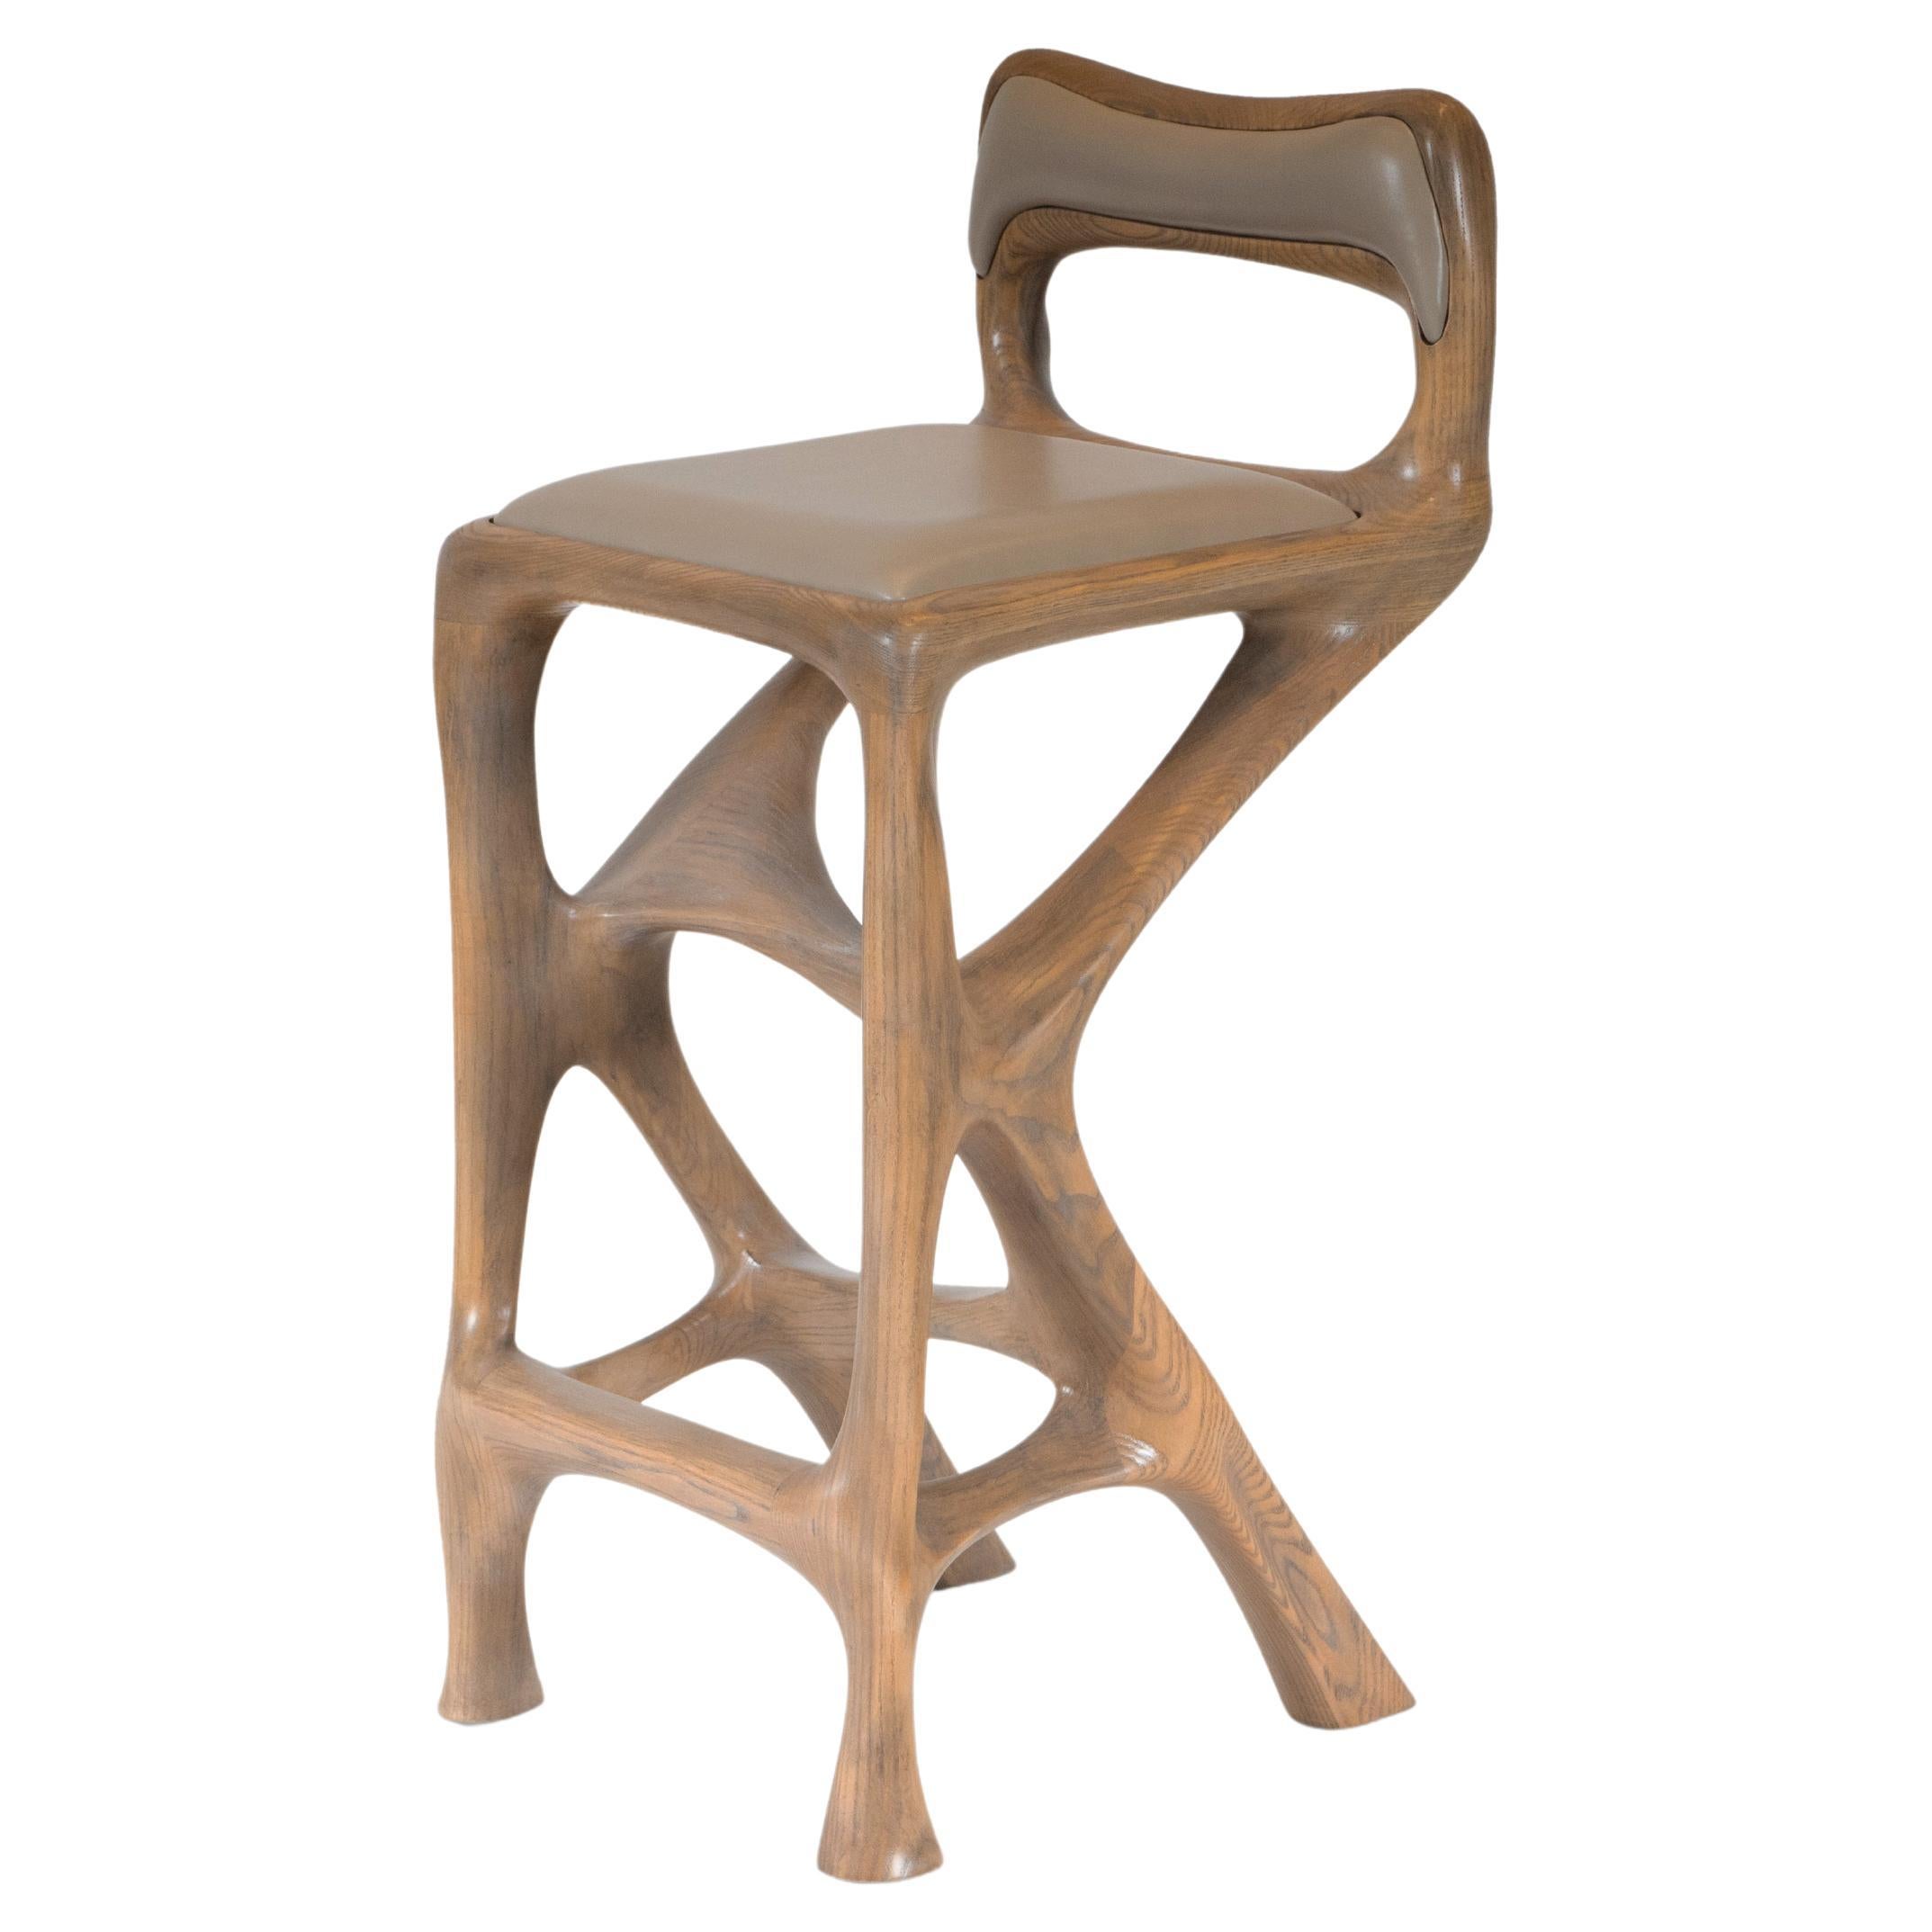 Amorph Chimera Bar Stool with Back in Antique Oak stain on Ash wood  For Sale